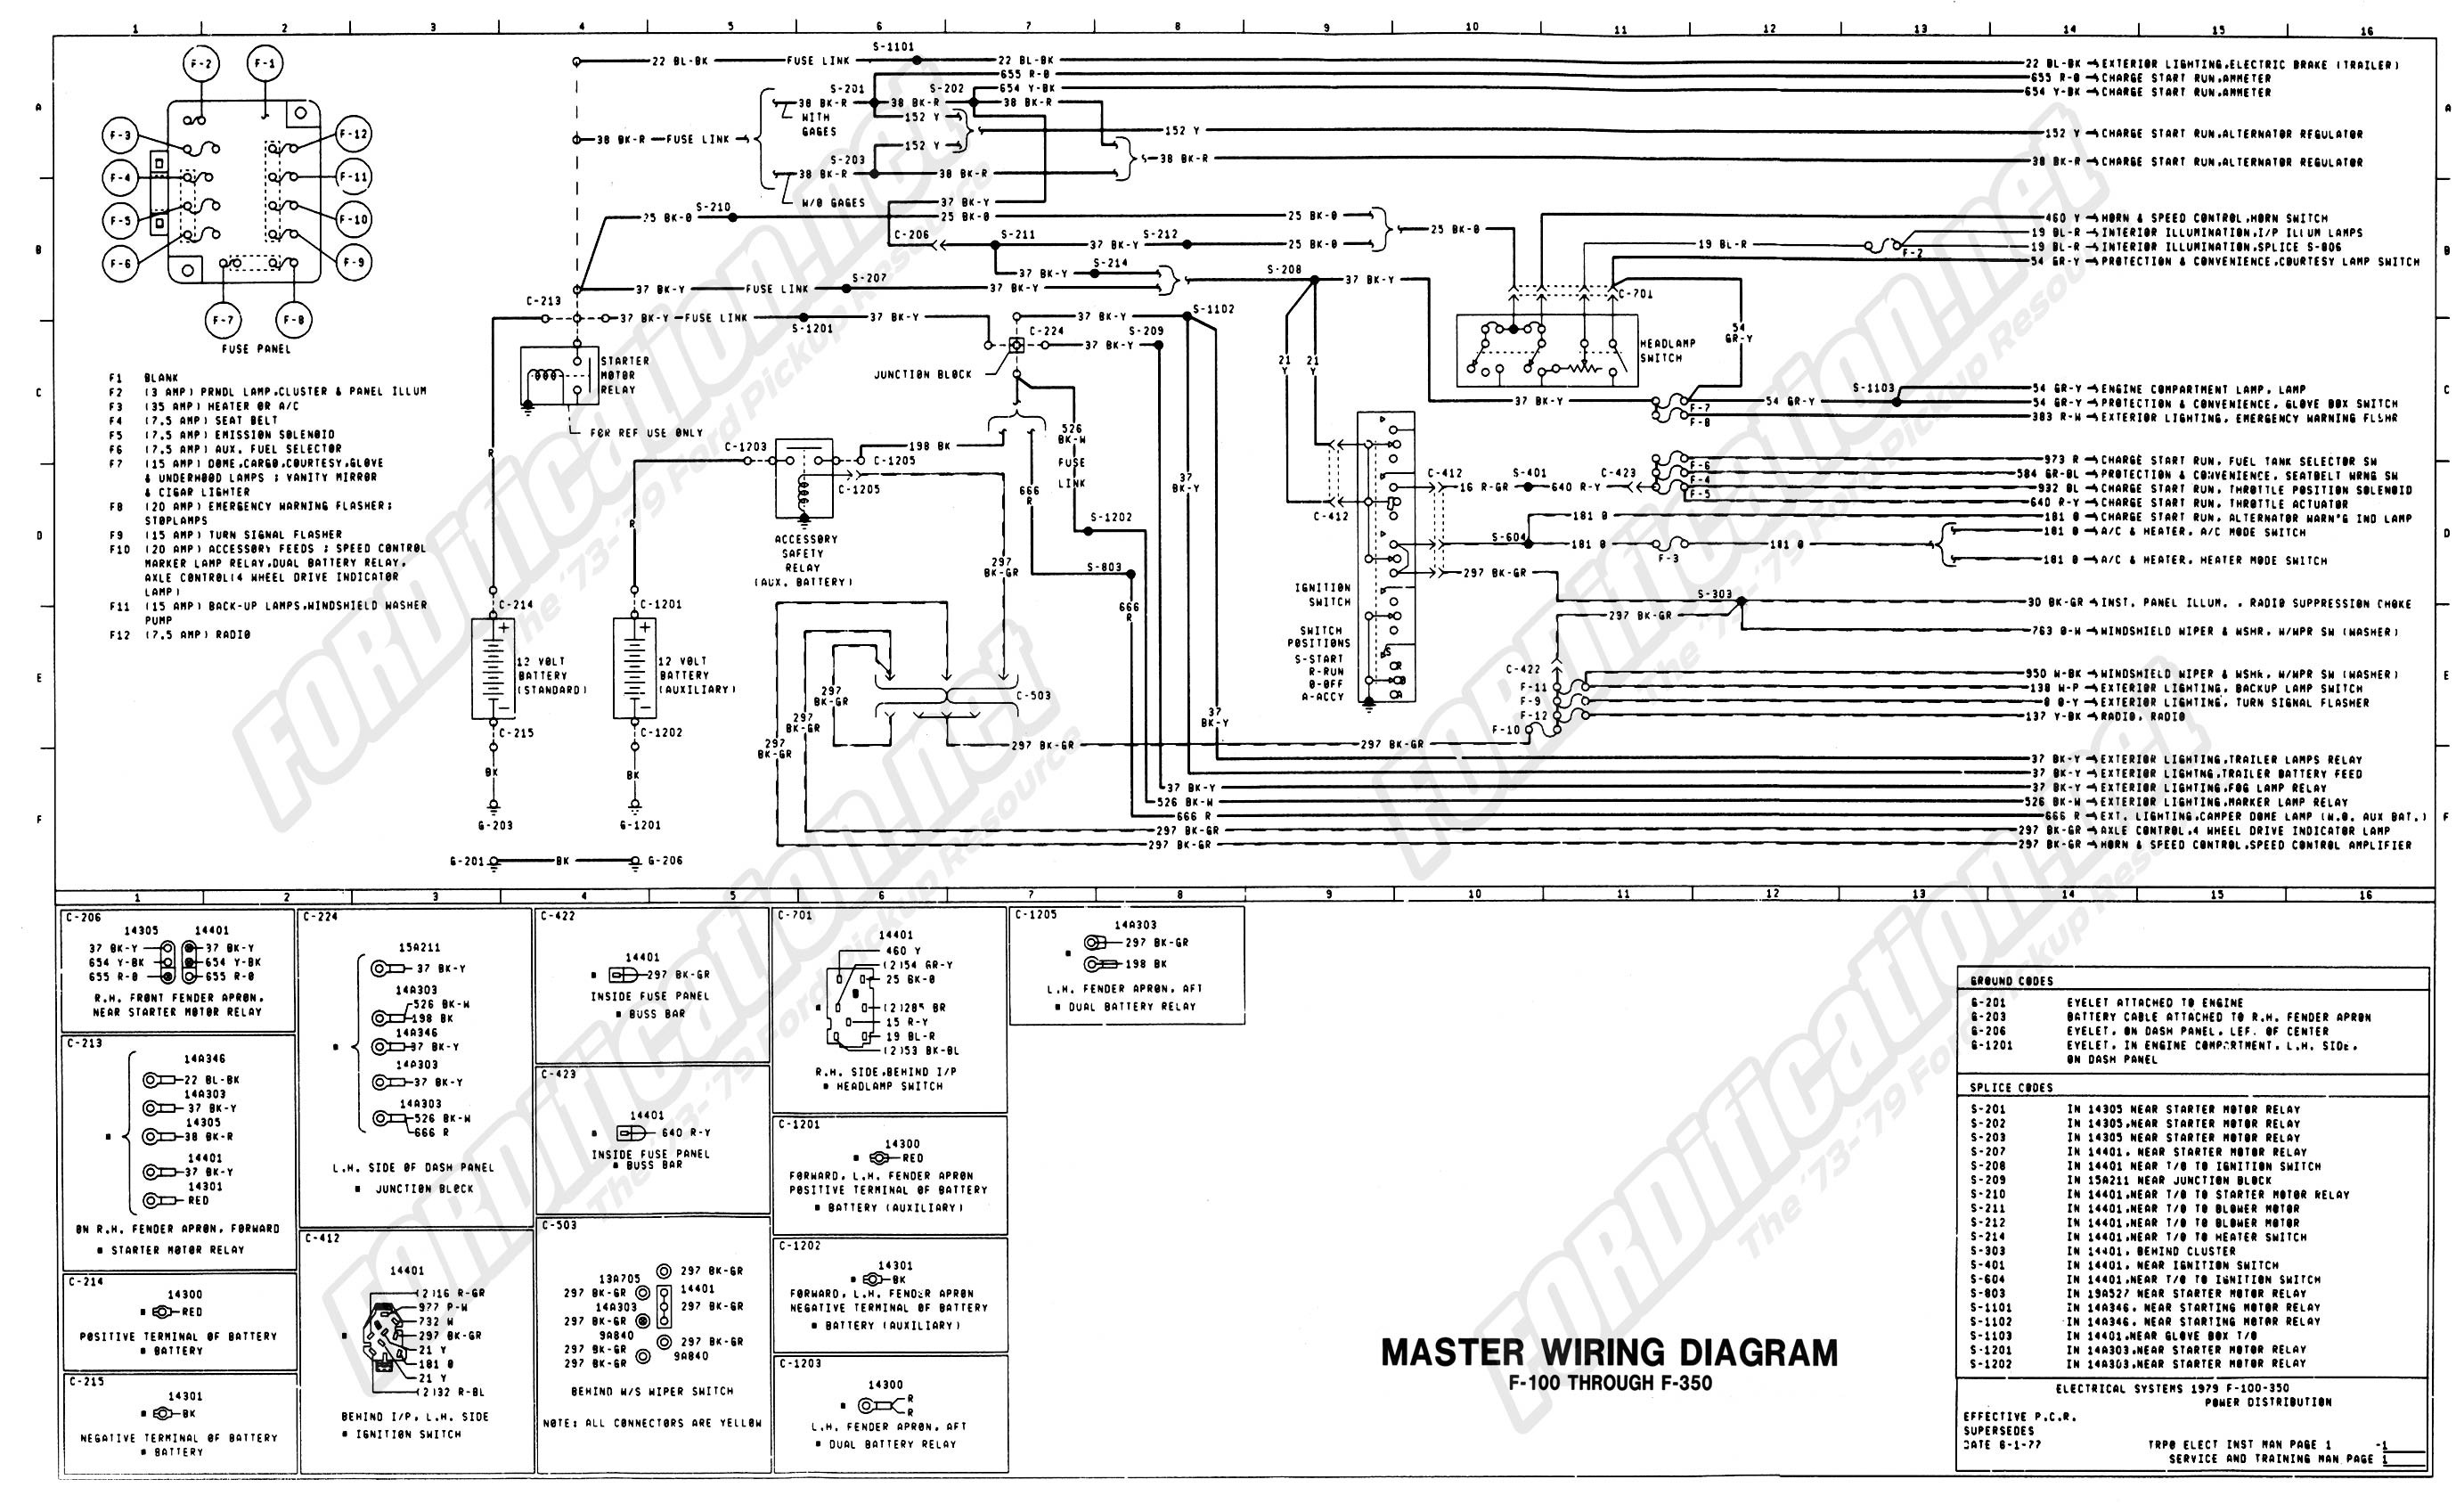 Ford 4 Pole Starter Solenoid Internal Wiring Diagram from mainetreasurechest.com